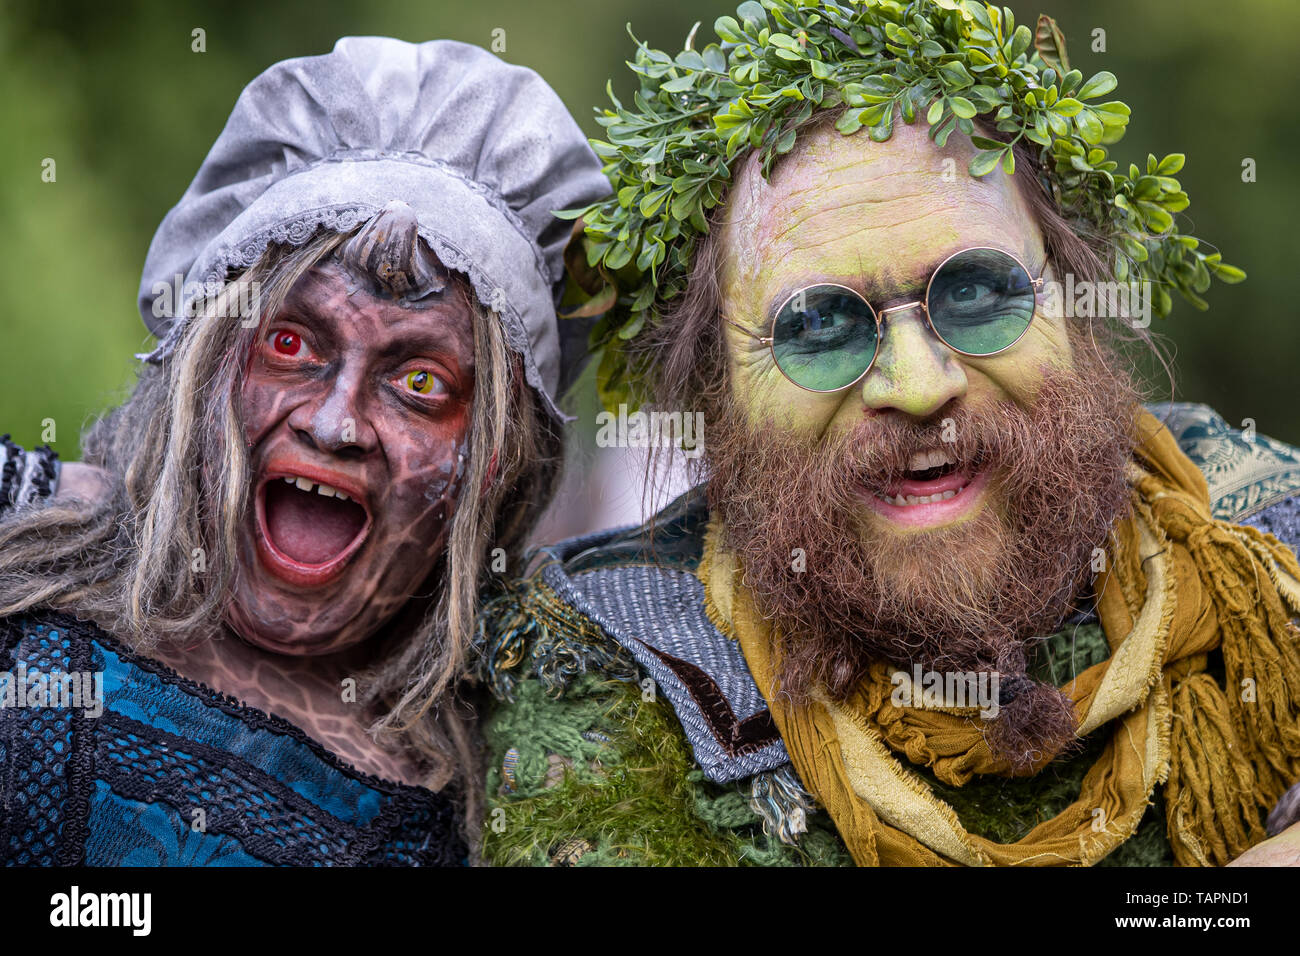 Lukavec, Croatia. 25th May, 2019. People dressed as mythical figures participate in the Perunfest, a festival dedicated to forgotten stories and folktales from ancient ages, at Lukavec Castle in Lukavec, Croatia, May 25, 2019. Credit: Davor Puklavec/Xinhua/Alamy Live News Stock Photo